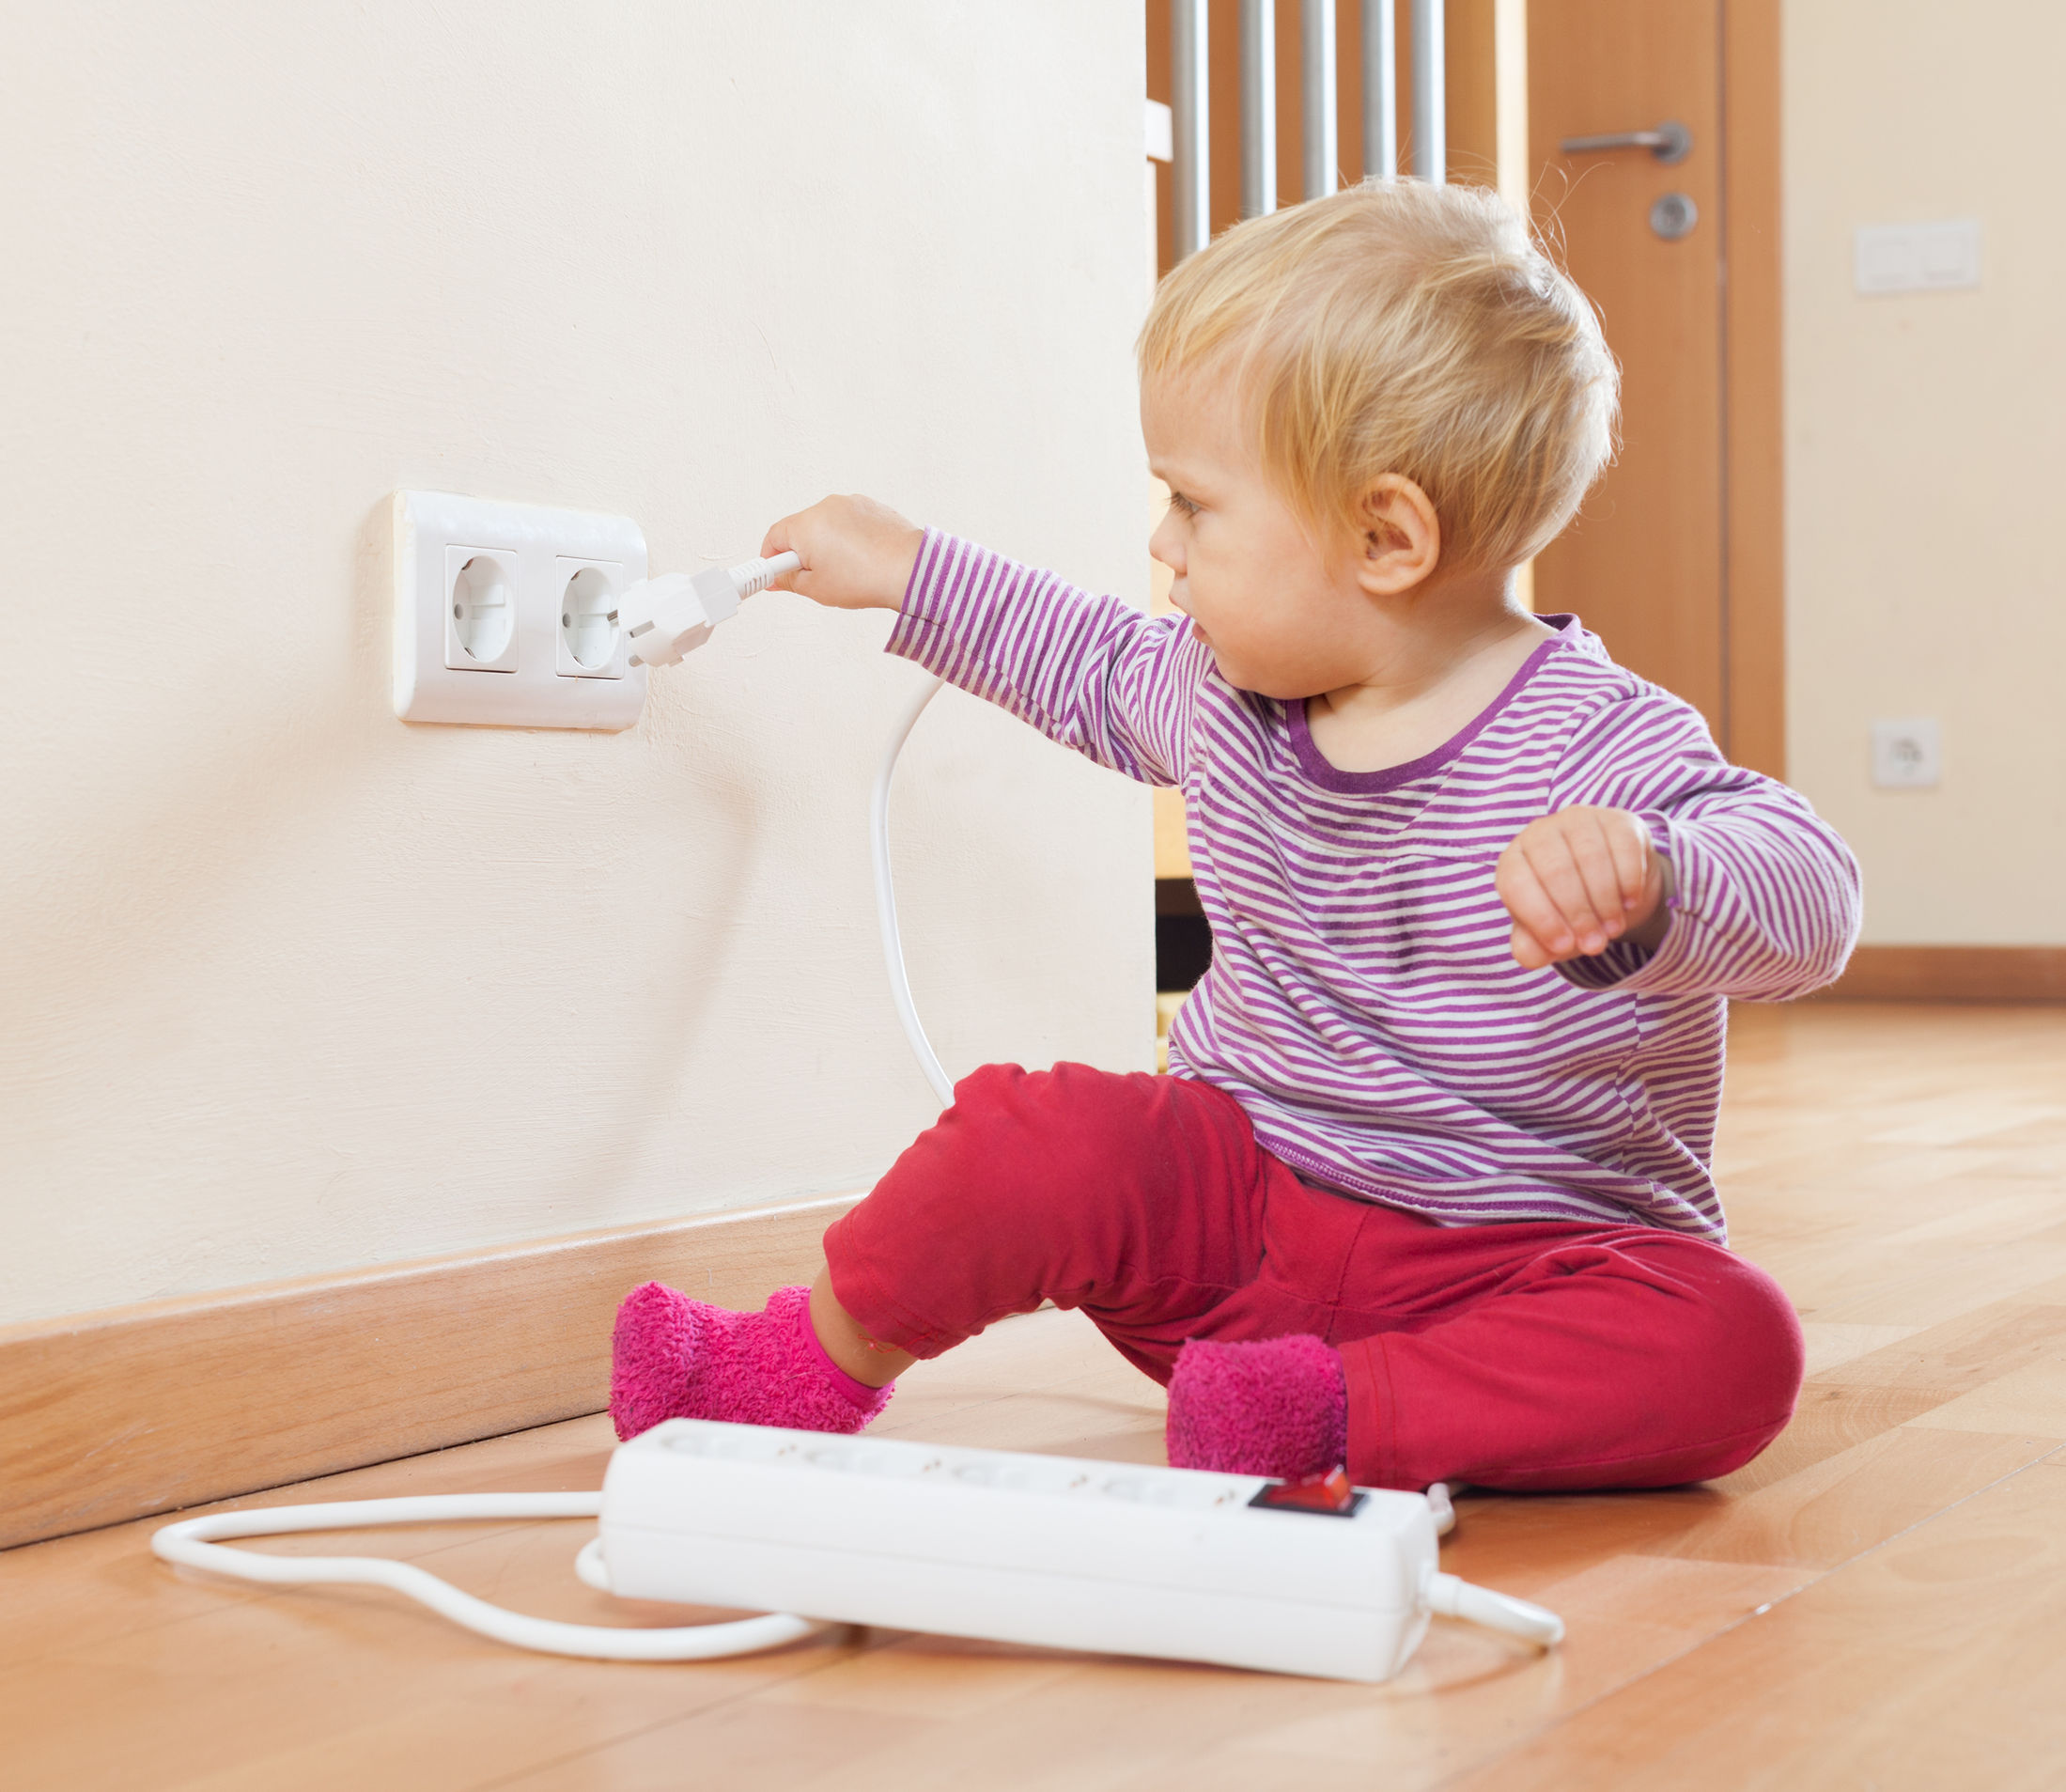 Tips for Childproofing Electrical Outlets & Power Strips